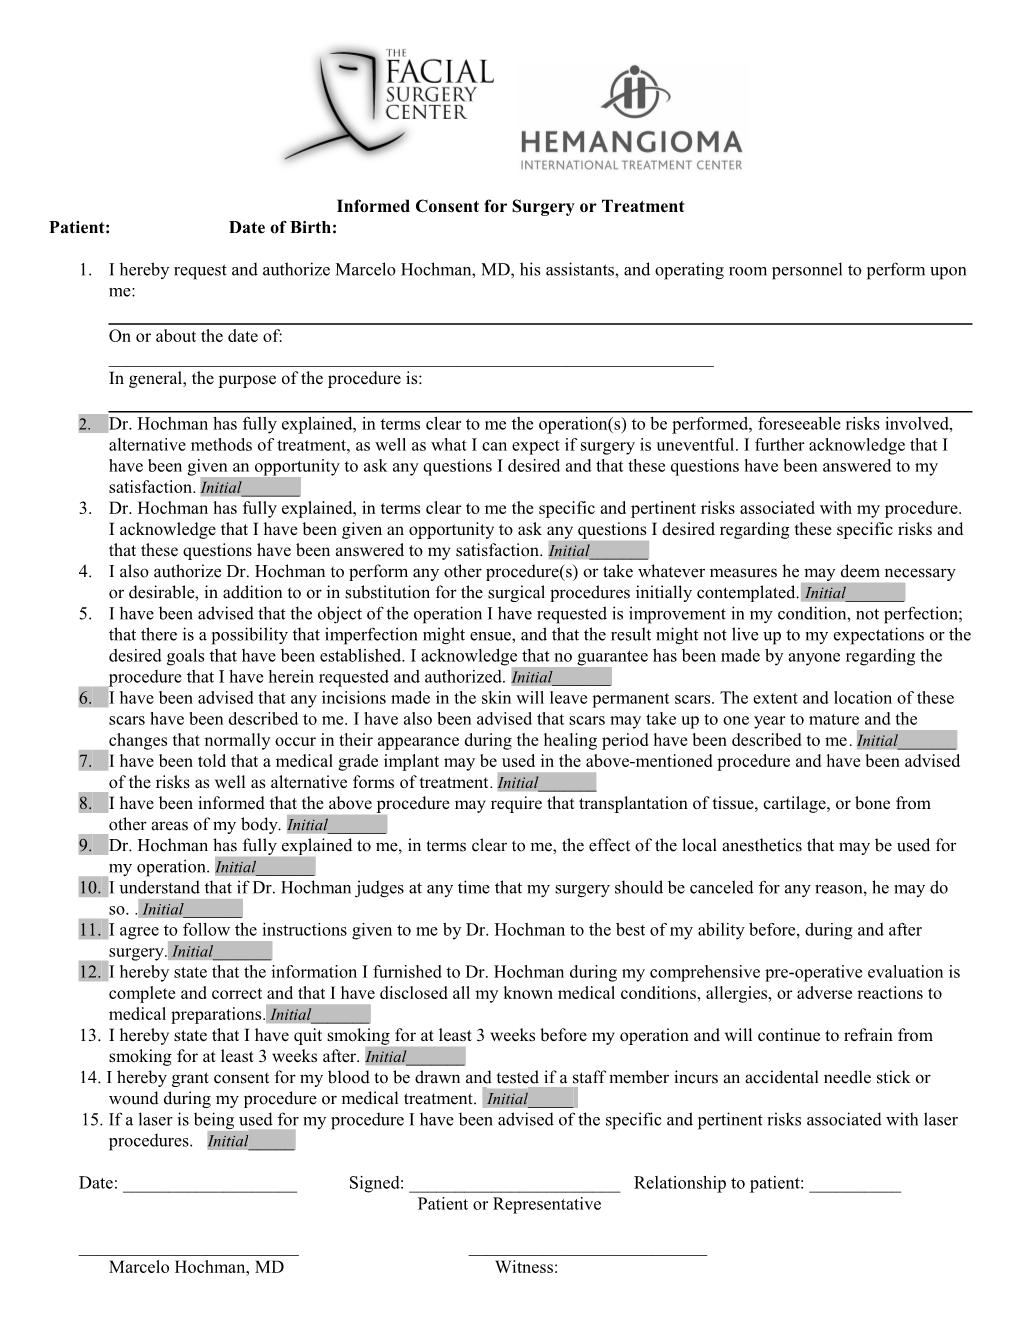 Informed Consent for Surgery Or Treatment s1